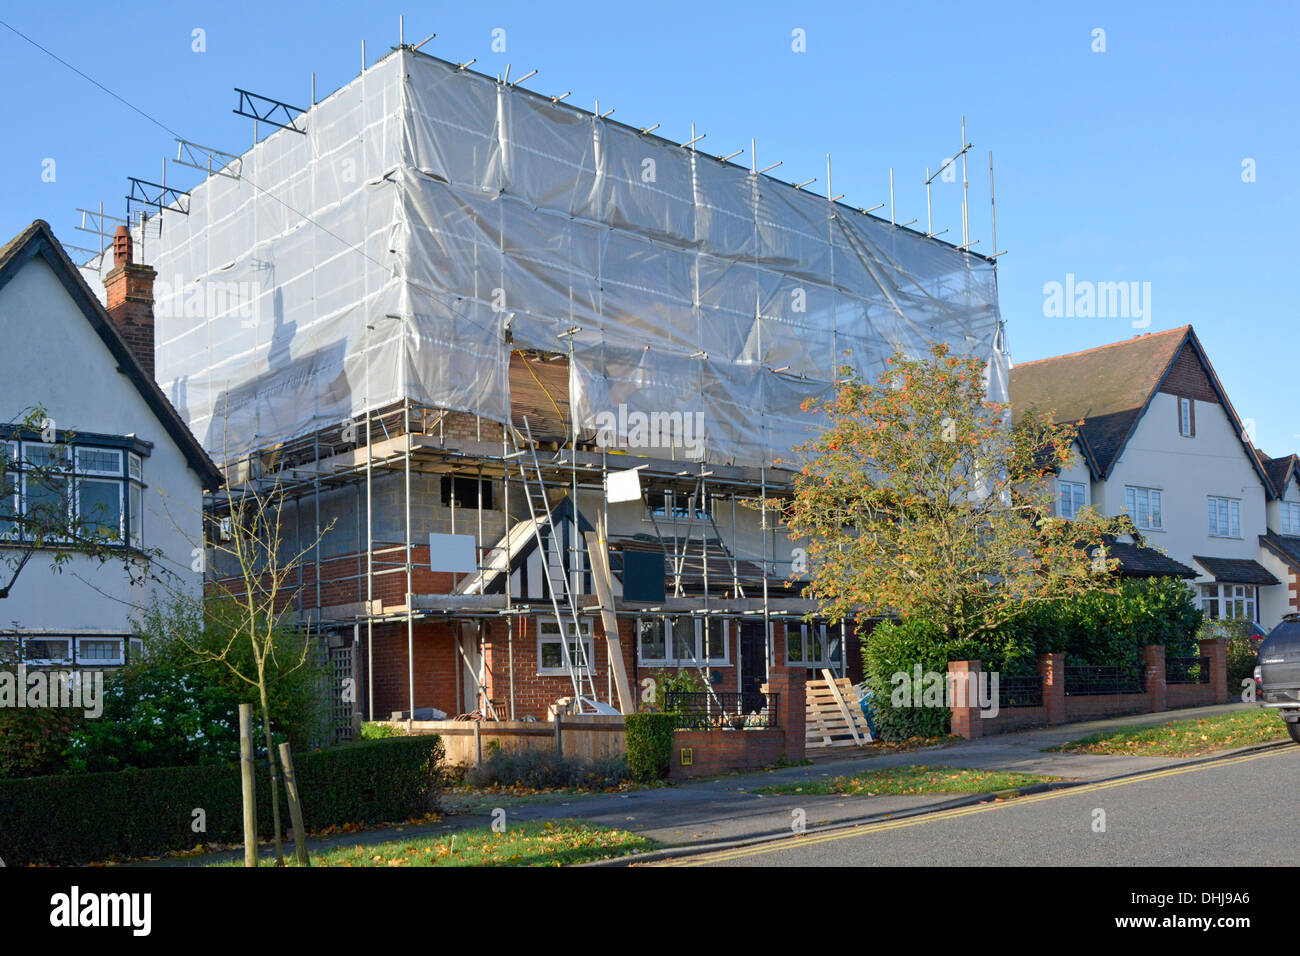 Construction industry building site & existing detached house in scaffold & protection plastic sheeting during structural alterations Essex England UK Stock Photo